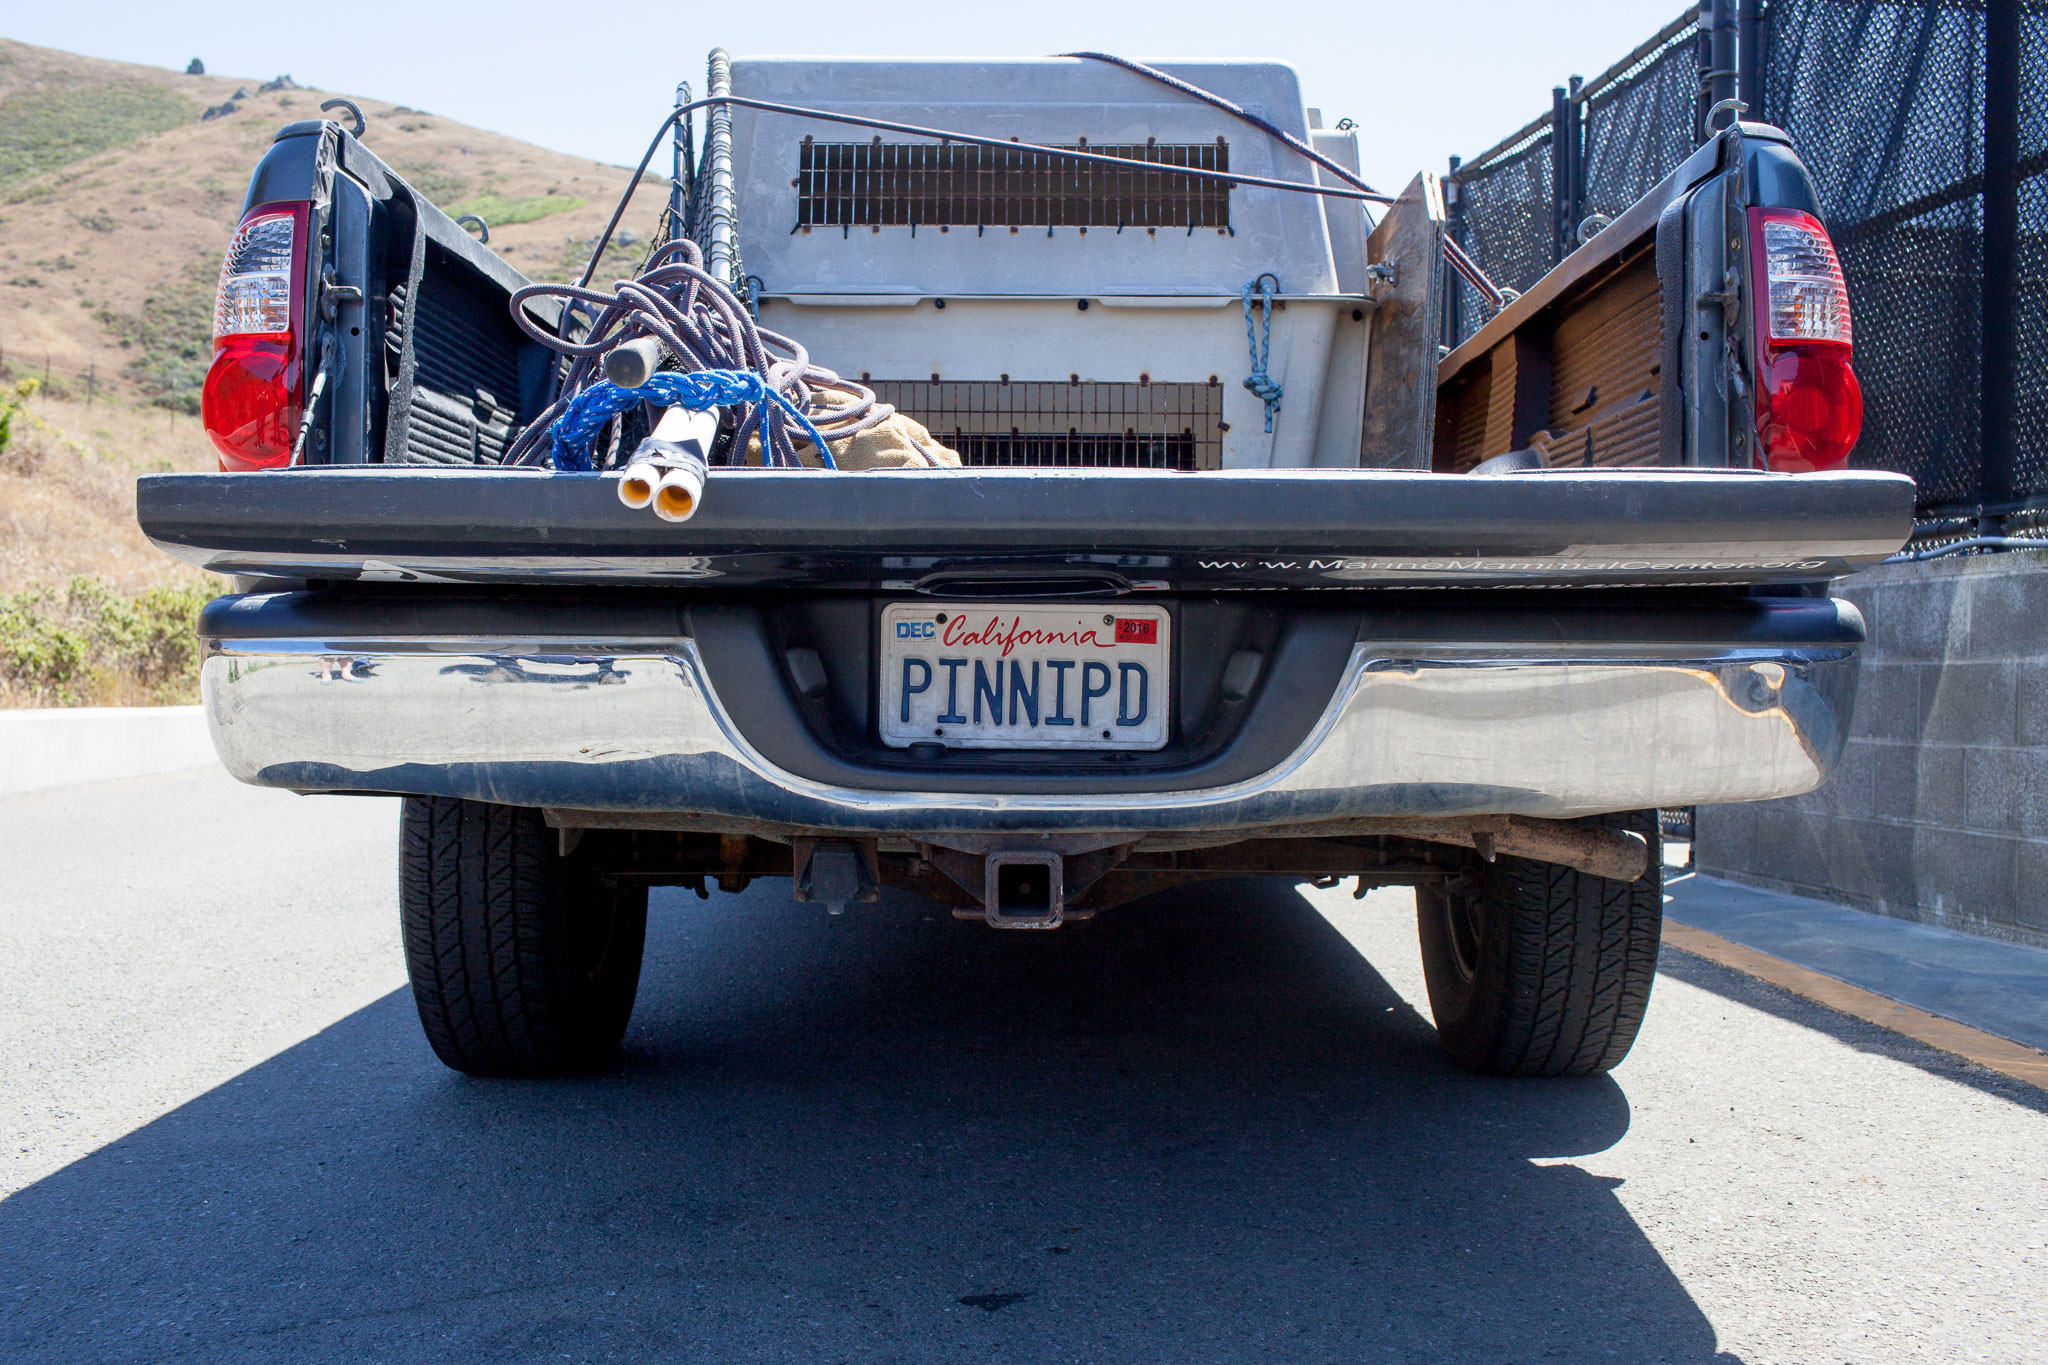 A pickup truck used by Marine Mammal Center staff to rescue injured wildlife sports a custom vanity plate. The full word—pinniped—means fin- or flipper-footed, and refers to seals, sea lions, and walruses.